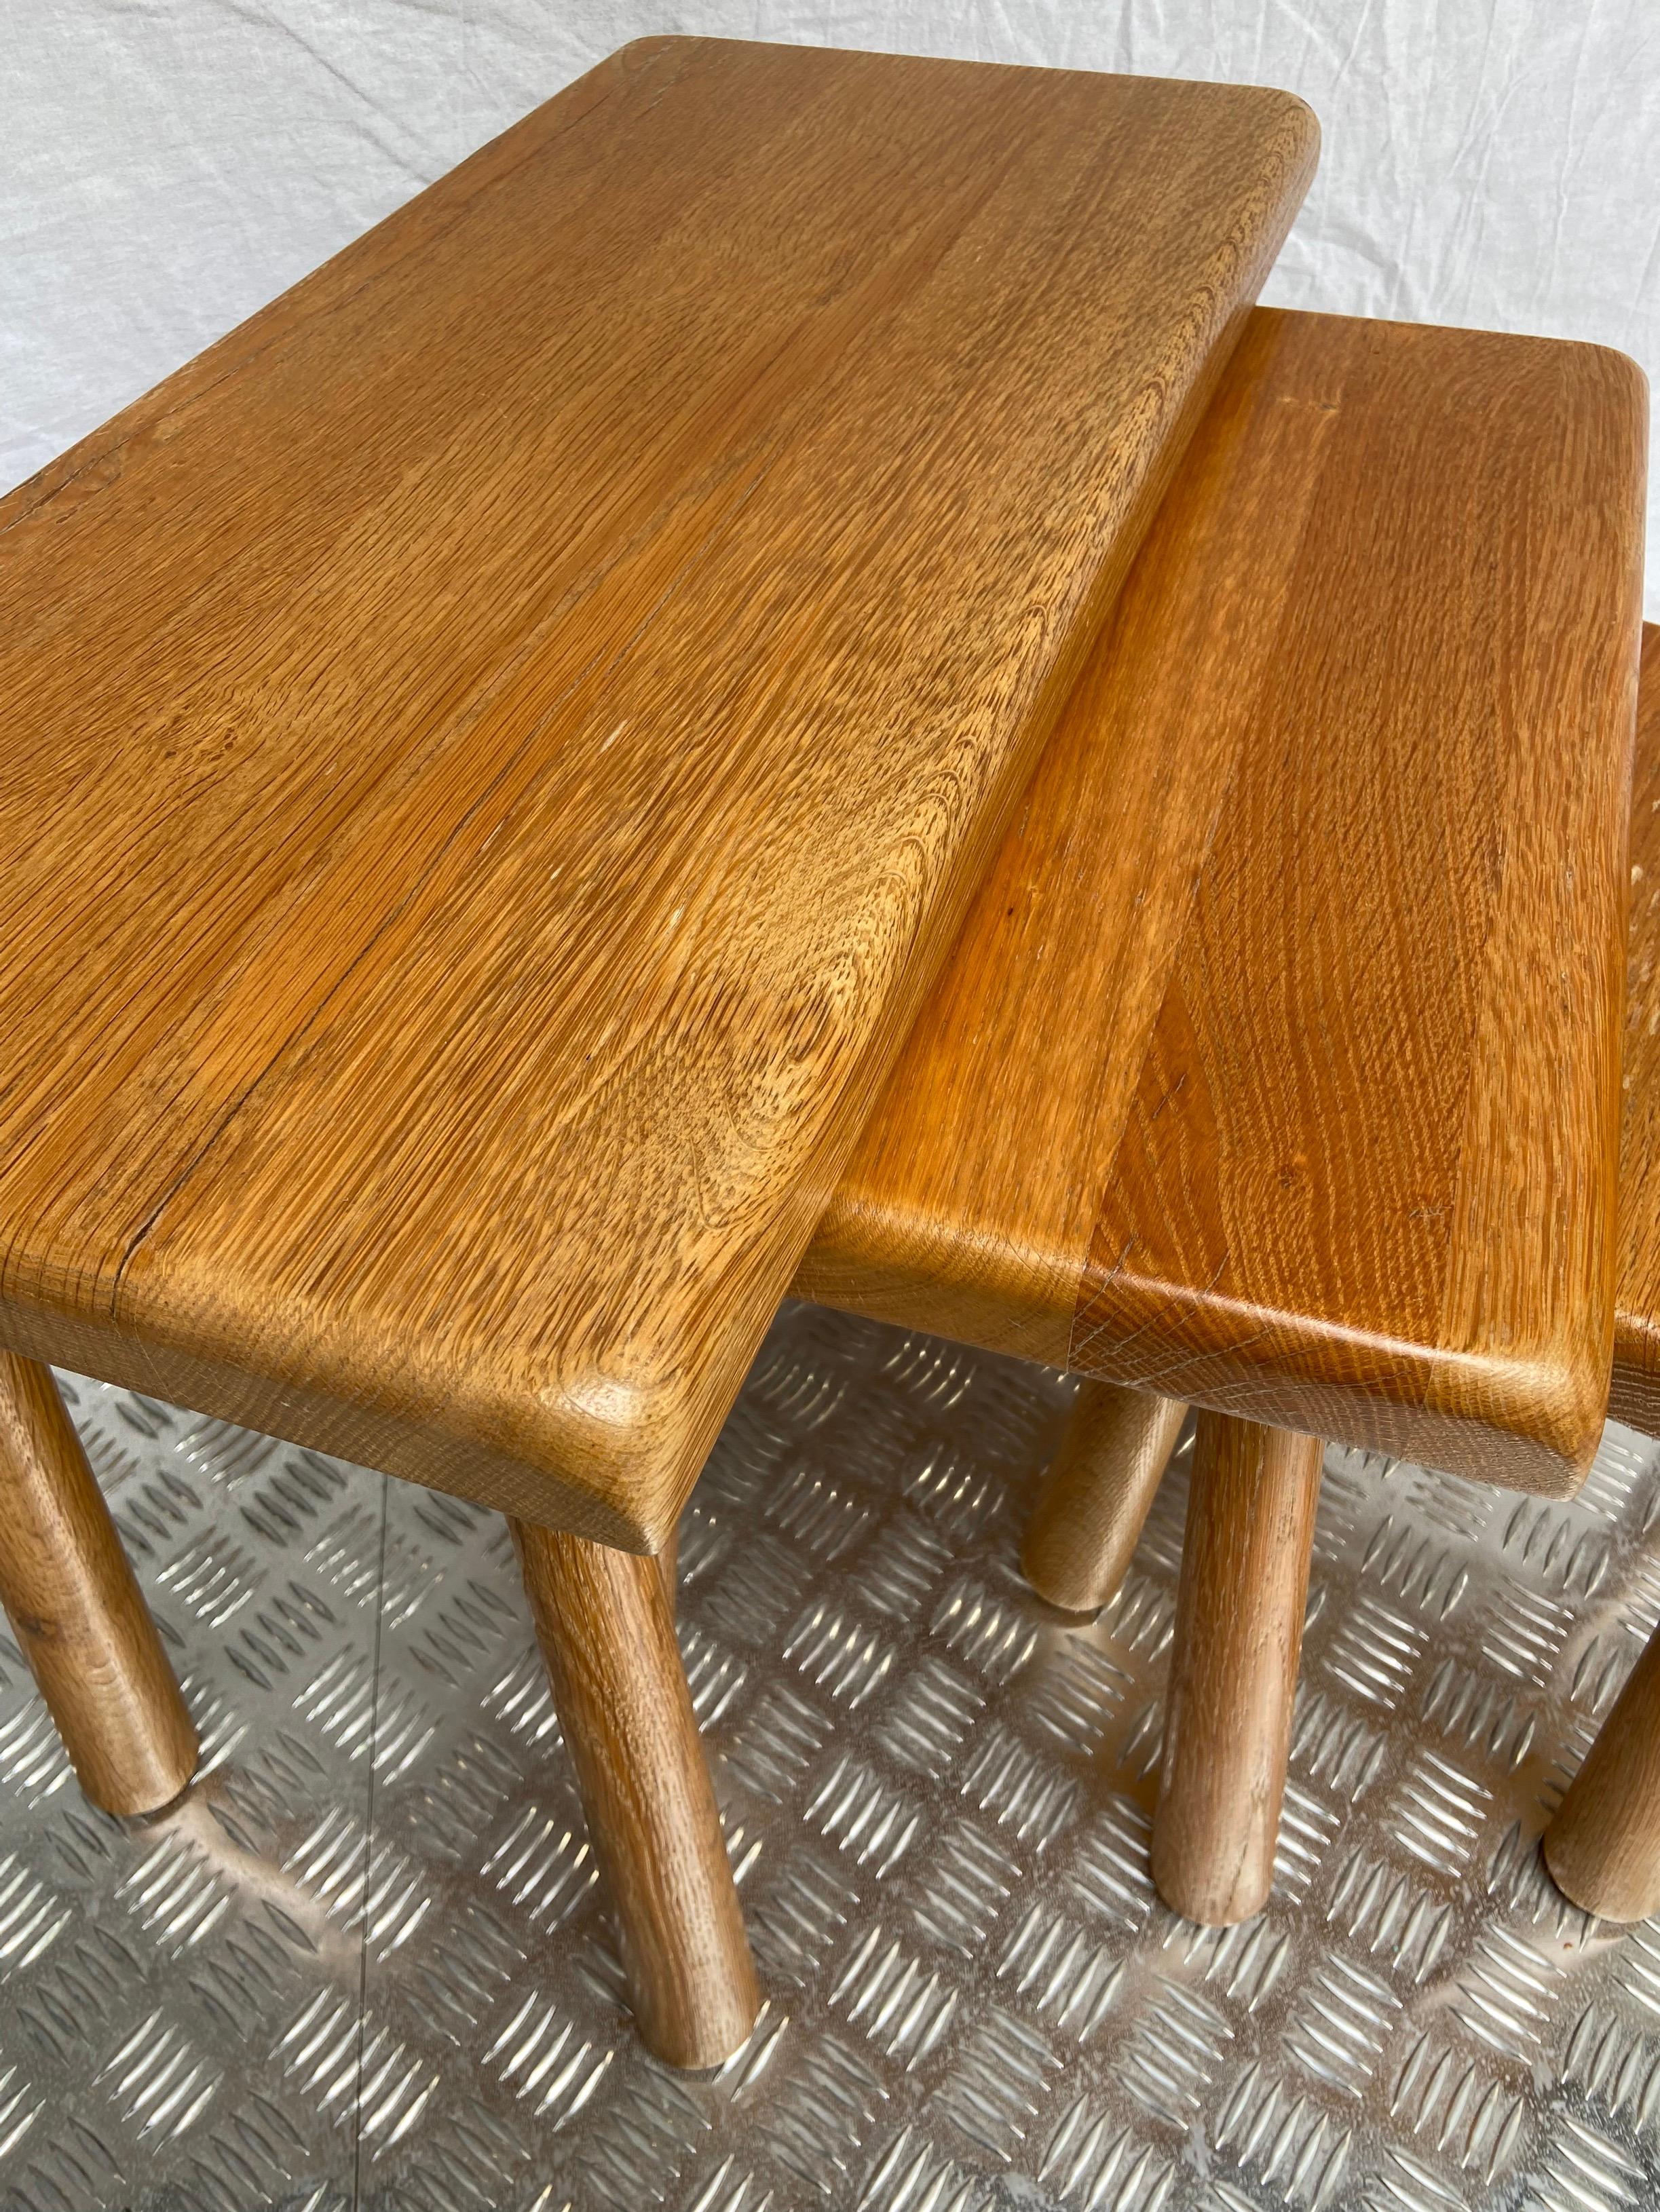 Three nesting tables - Fabriek Oisterwijk
Oak

Round and tapered foot

Holland around 1960

Measures: 45 x 65 x 30.